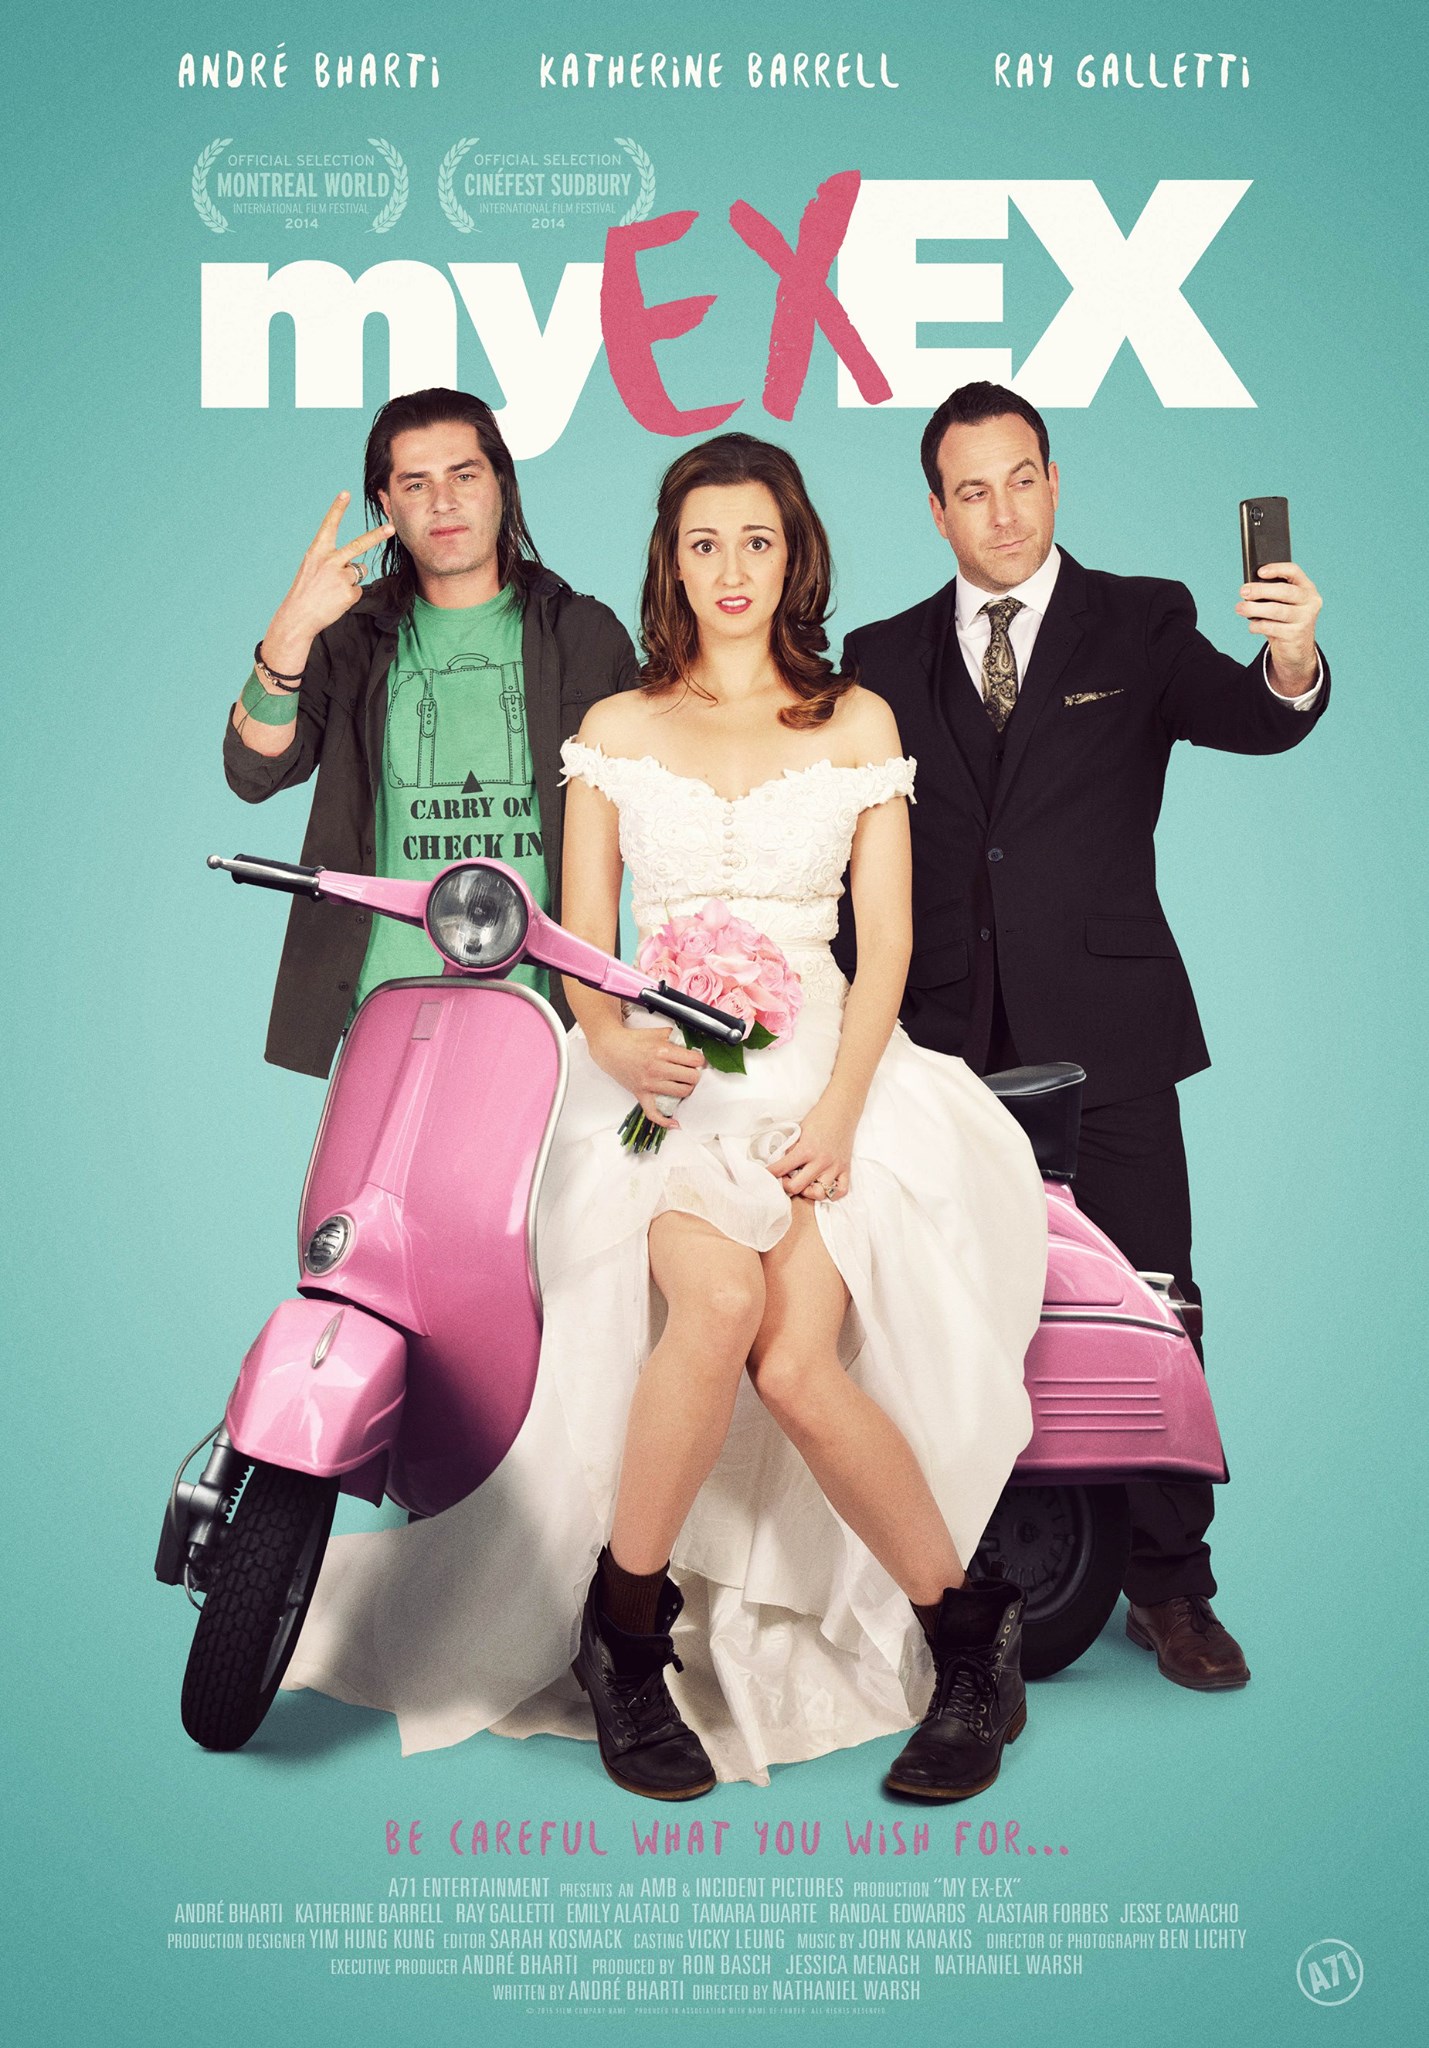 'My ExEx' poster for theatrical release 2015. with Andre Baharti and Ray Galletti